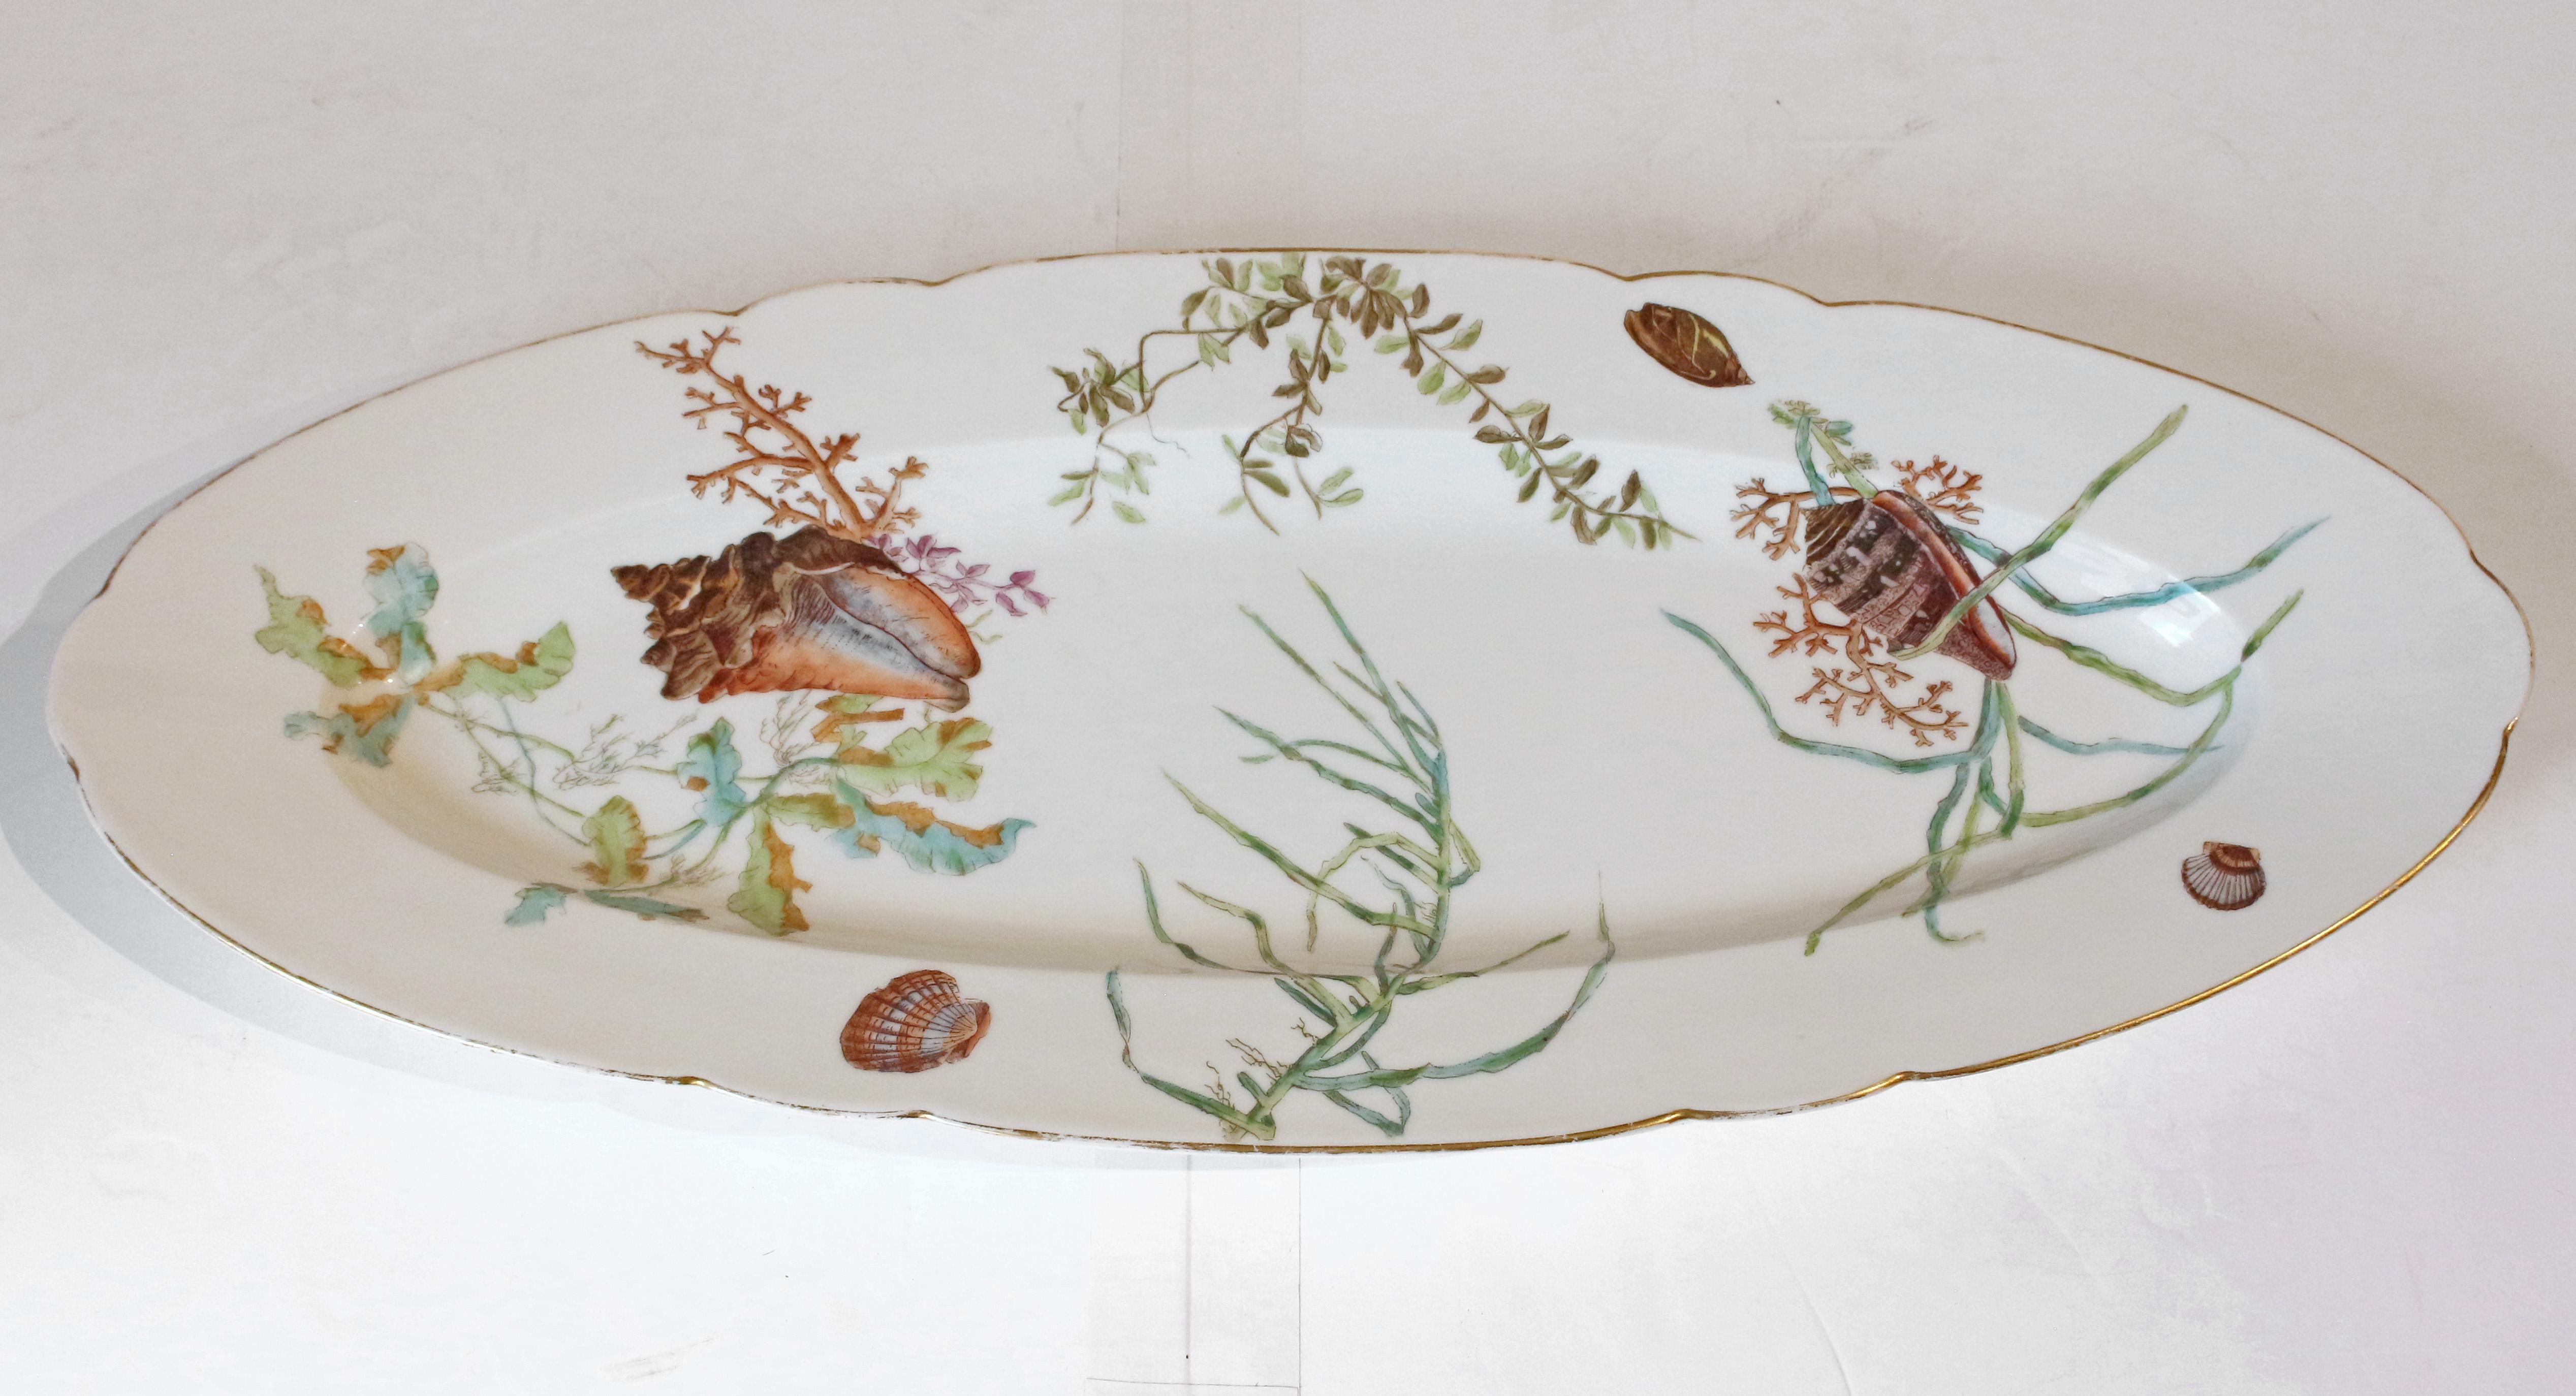 Circa 1880-1900 Seashells & Seaweed Motif Fish Service by Limoges For Sale 2